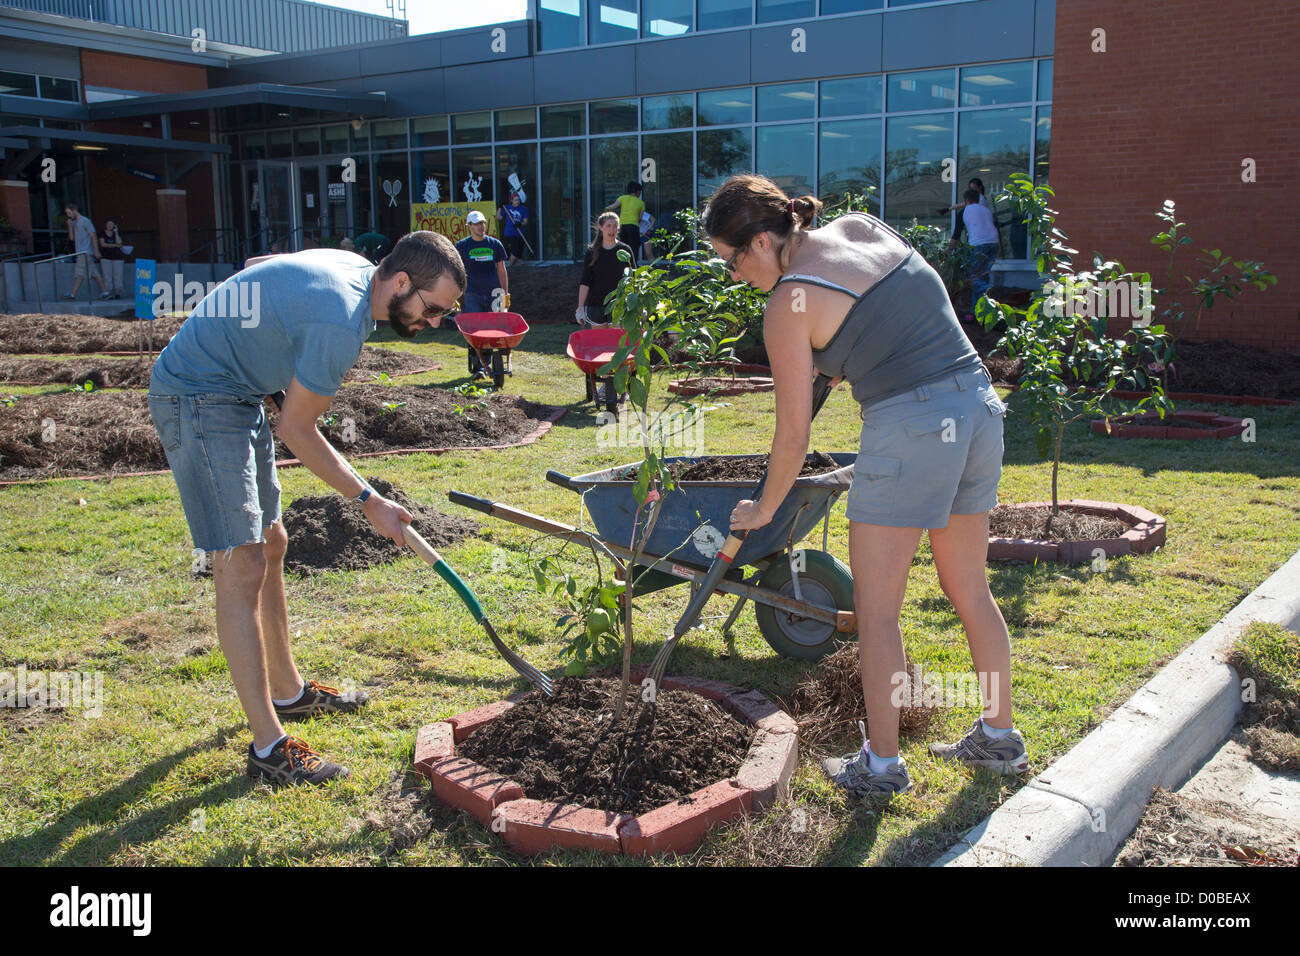 Volunteers work on landscaping and build an 'edible schoolyard' at Arthur Ashe Charter School in New Orleans. Stock Photo